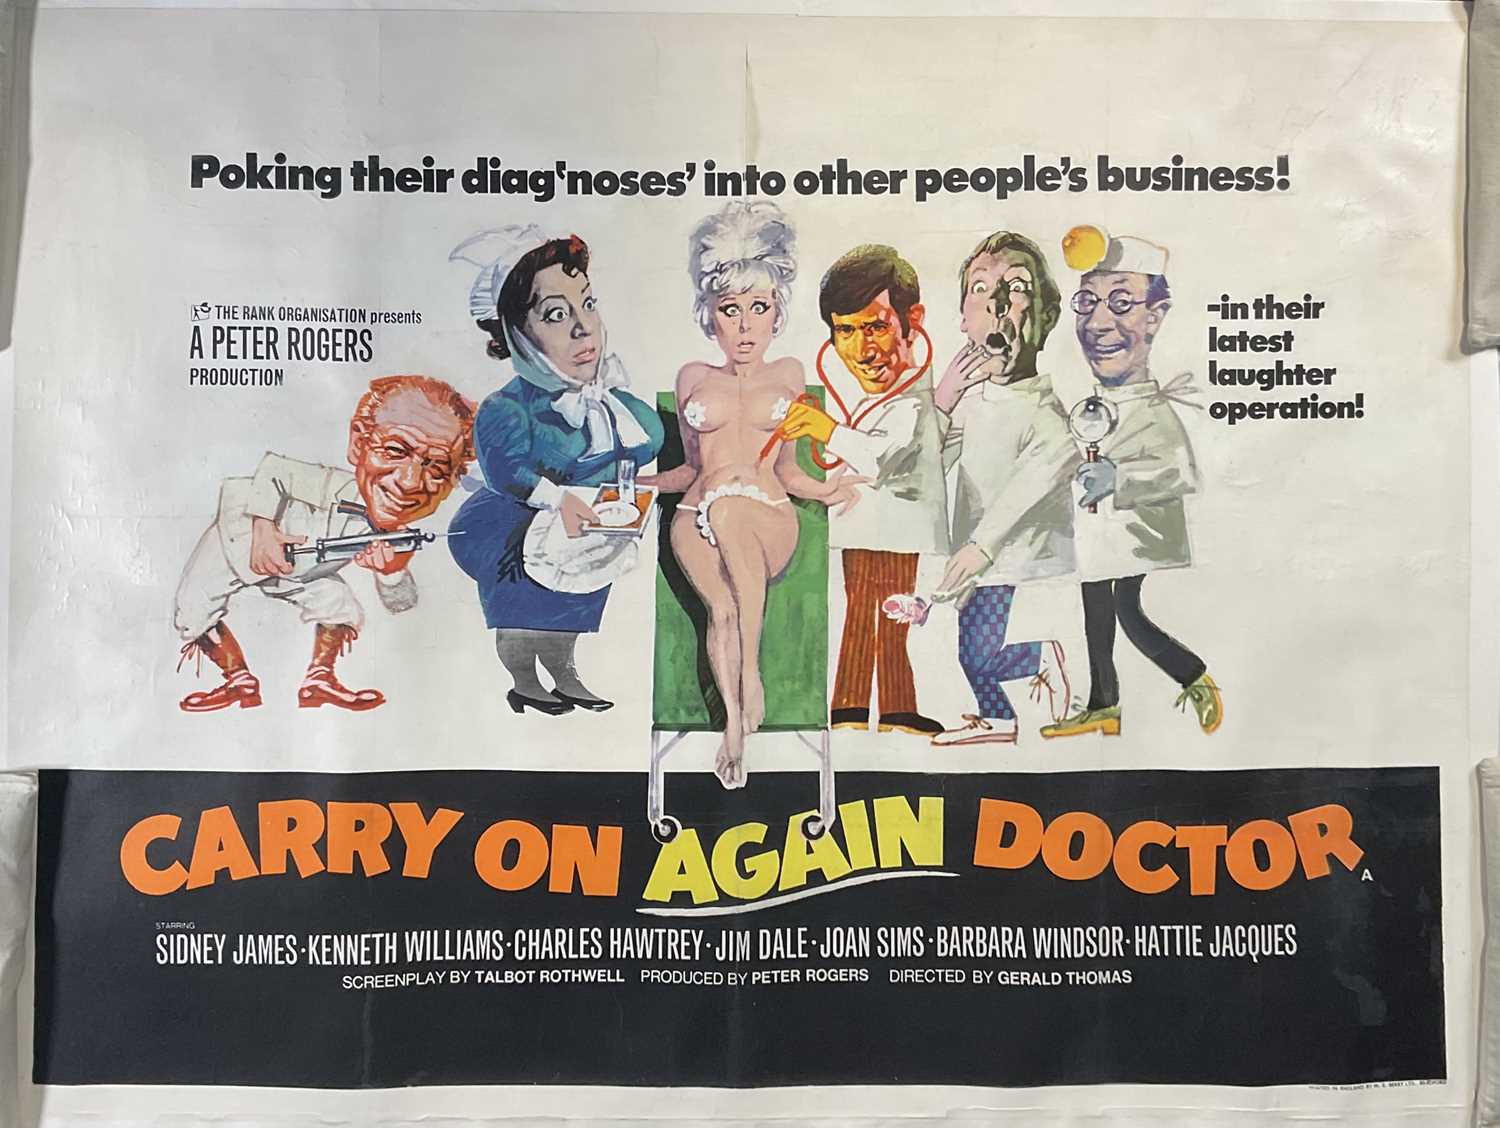 CARRY ON AGAIN DOCTOR (1969) Linen backed and restored UK Quad film poster, Peter Rogers classic